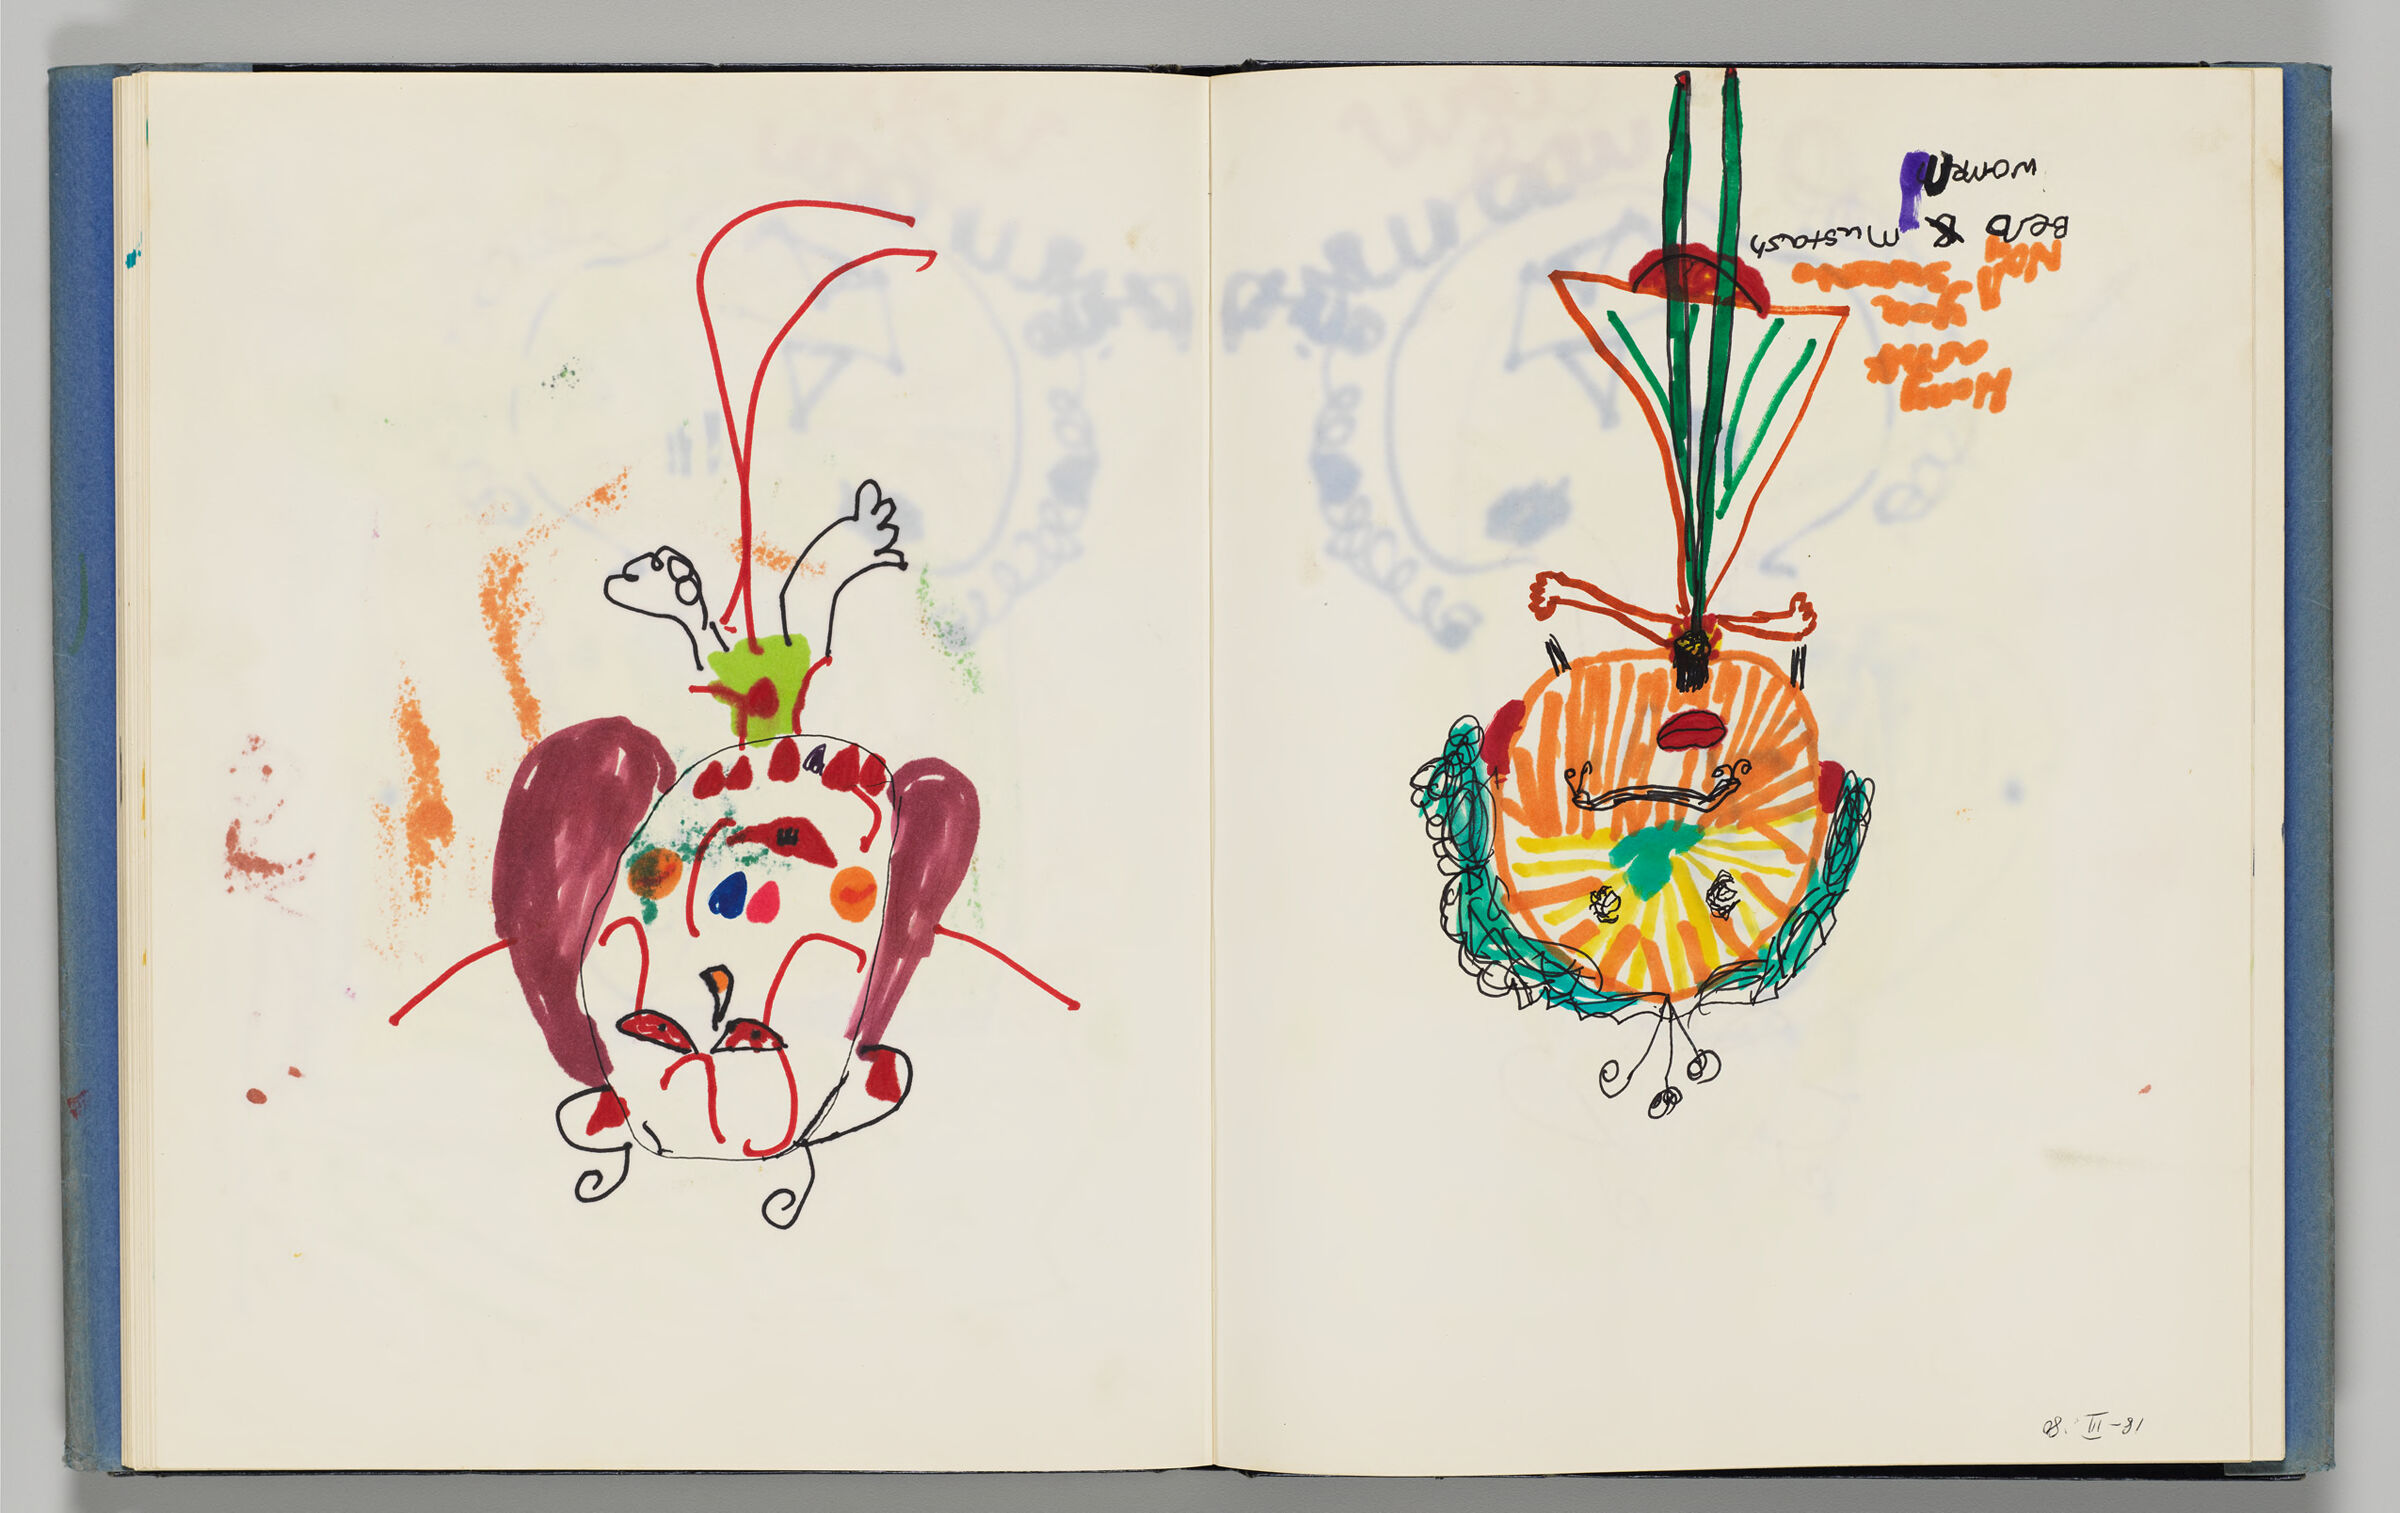 Untitled (Child's Drawing With Bleed-Through Of Previous Page And Color Transfer, Left Page); Untitled (Child's Drawing With Color Transfer, Right Page)